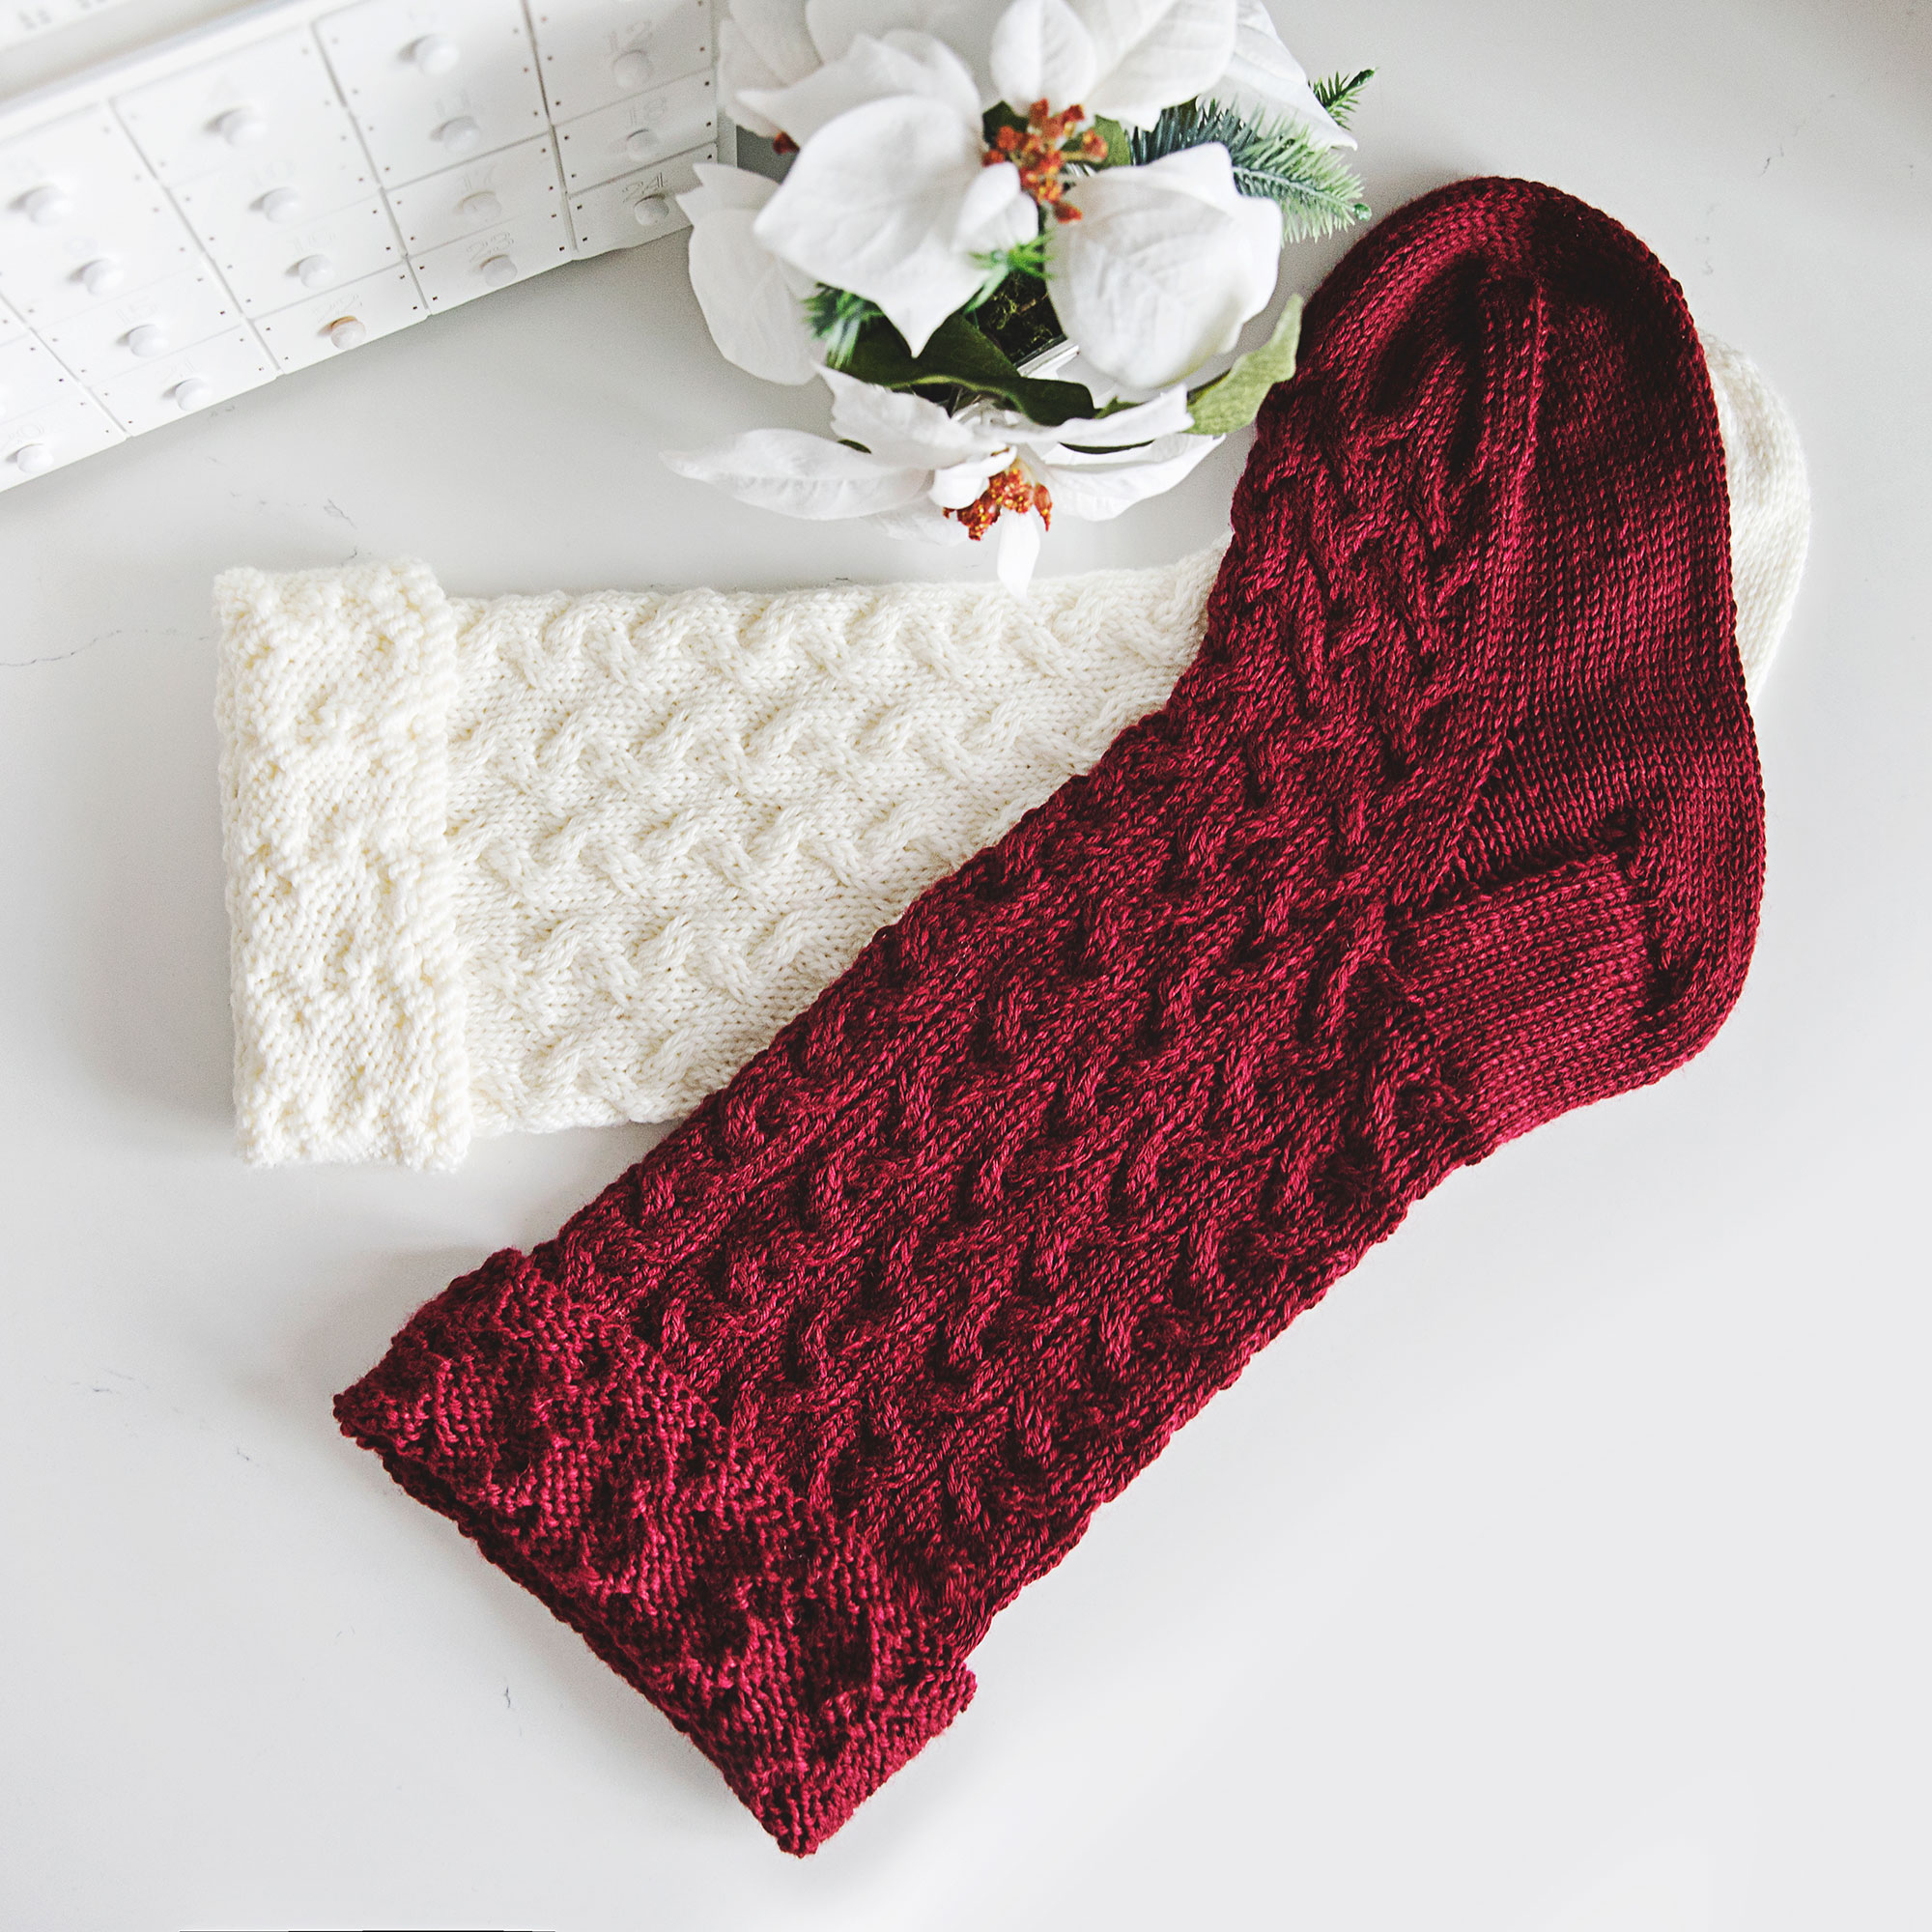 18 Free Knitted Christmas Stocking Patterns